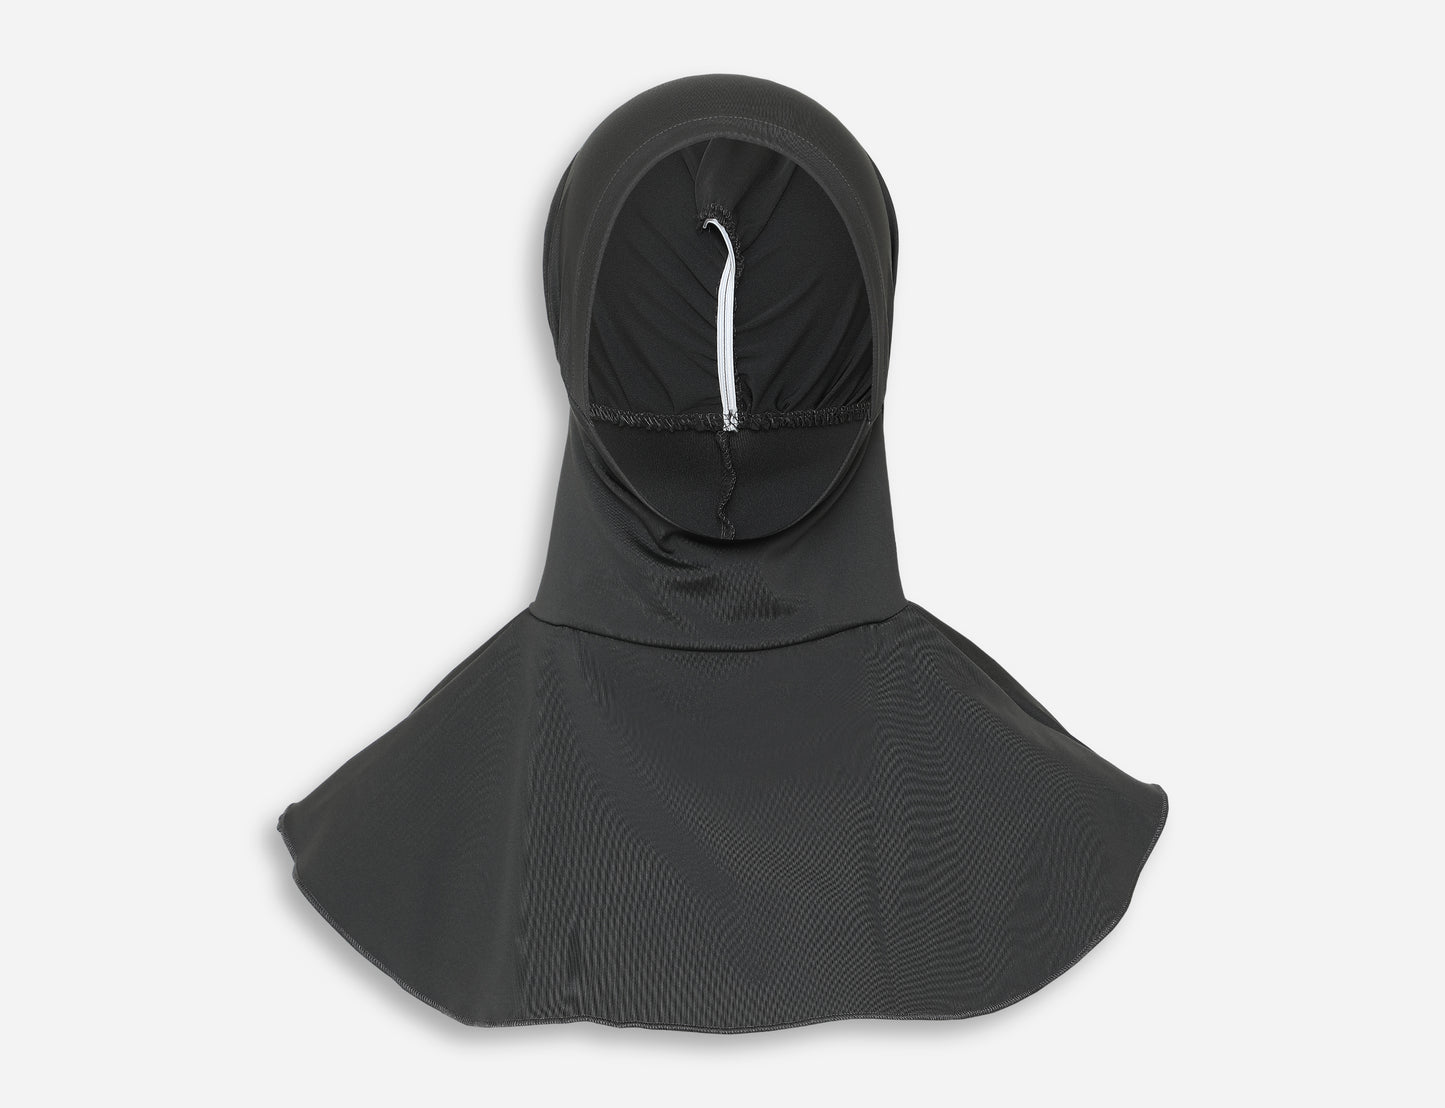 Activewear Under-Hijab full head & neck cover